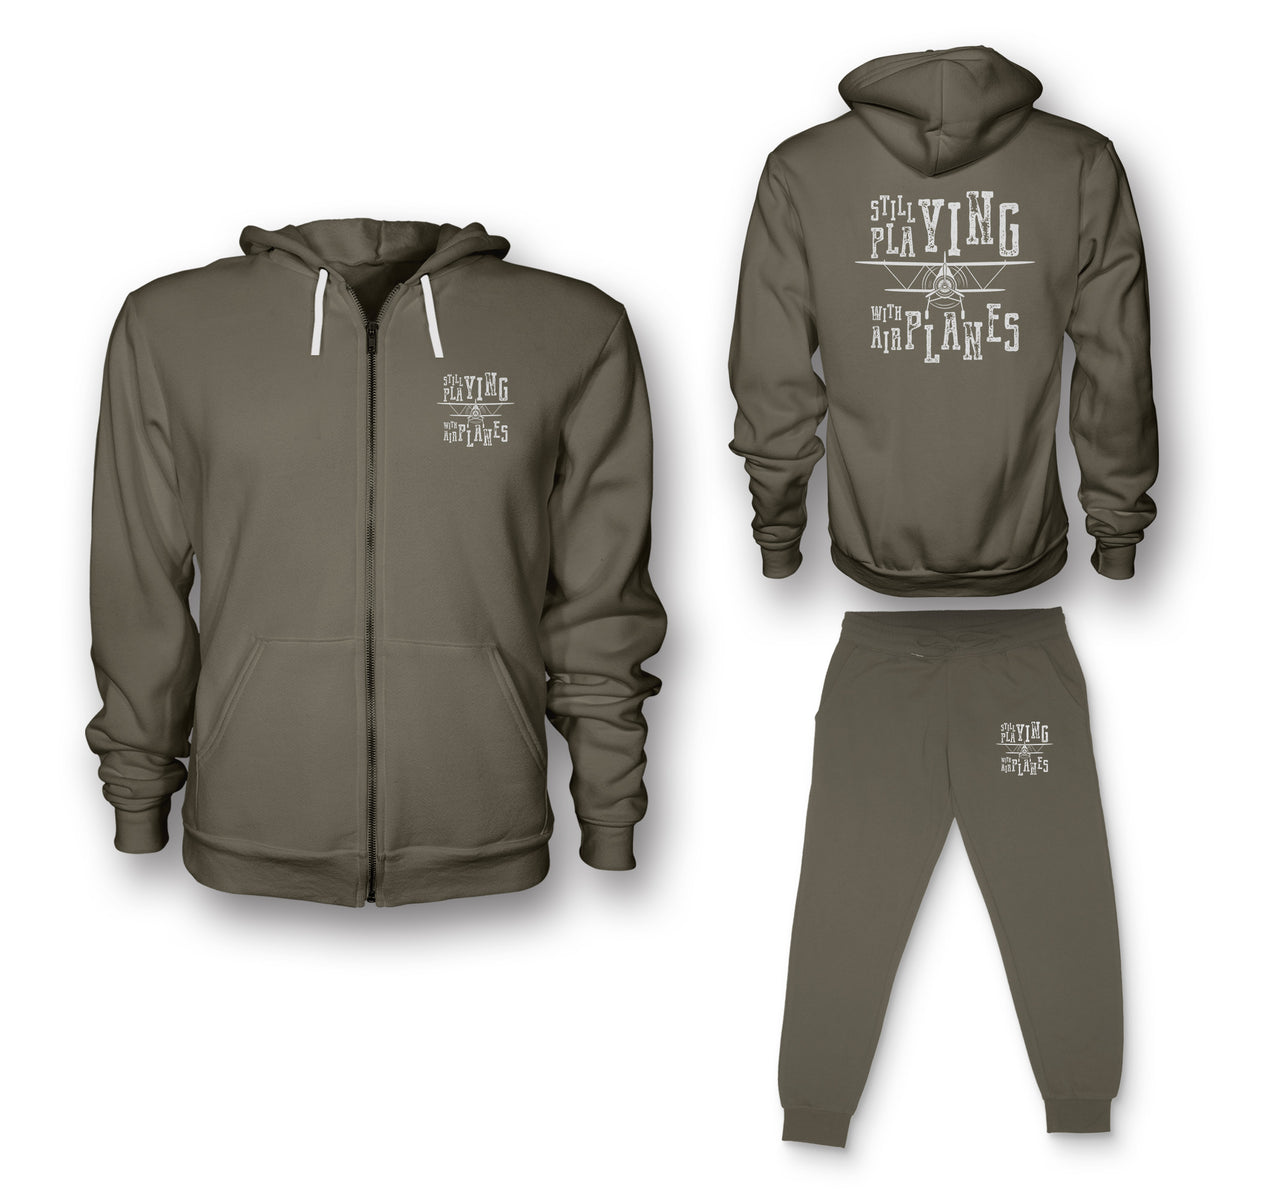 Still Playing With Airplanes Designed Zipped Hoodies & Sweatpants Set